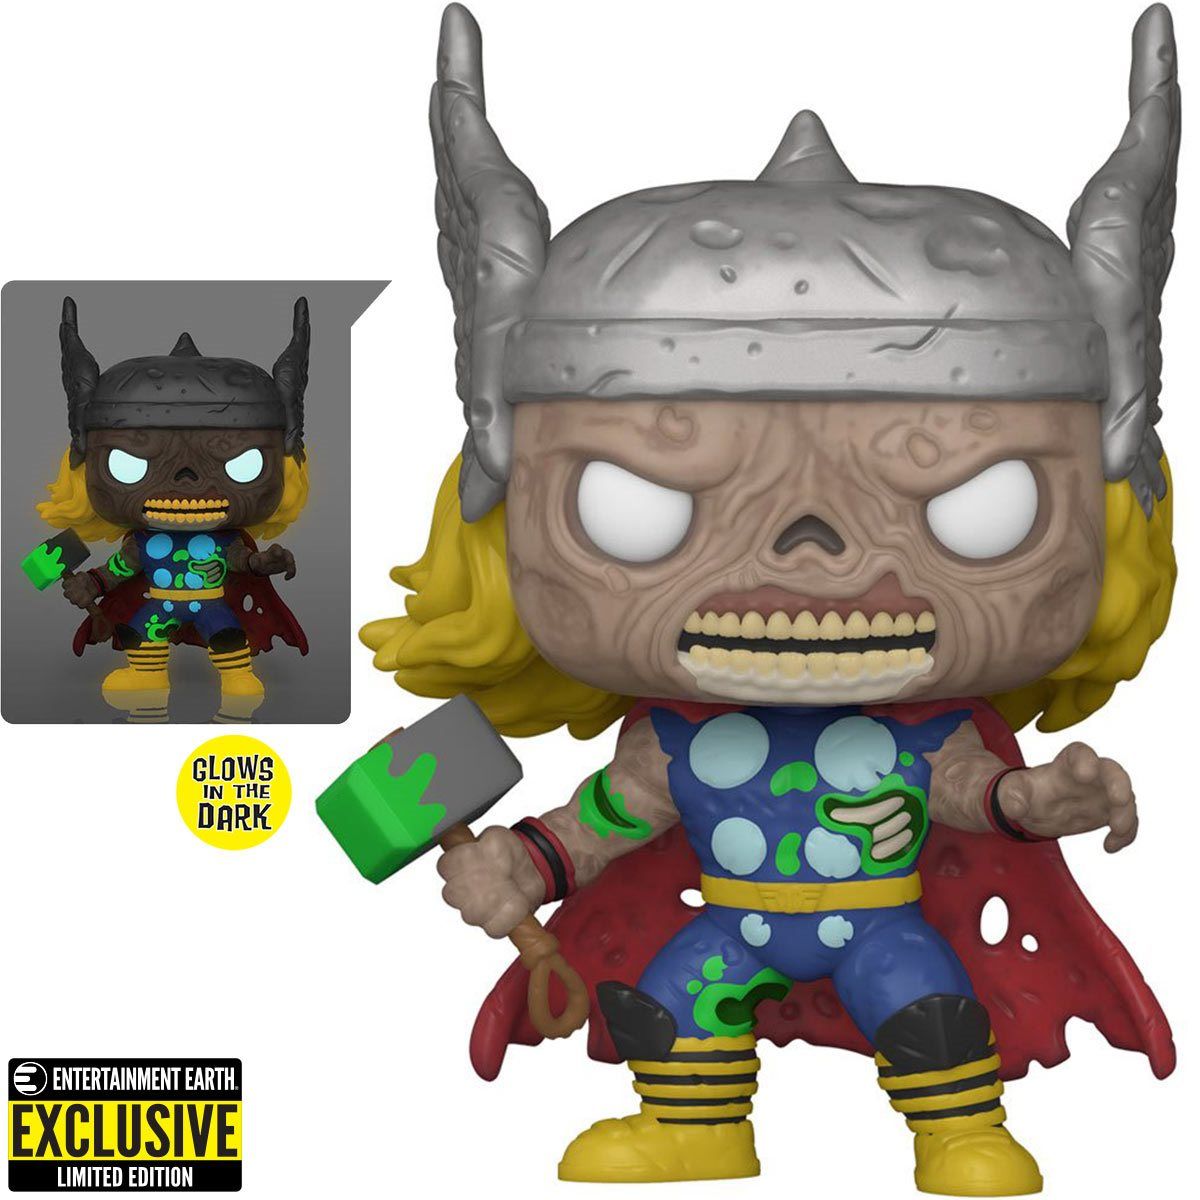 Marvel Zombies Thor Glow in the Dark Funko Pop Figure Entertainment Earth